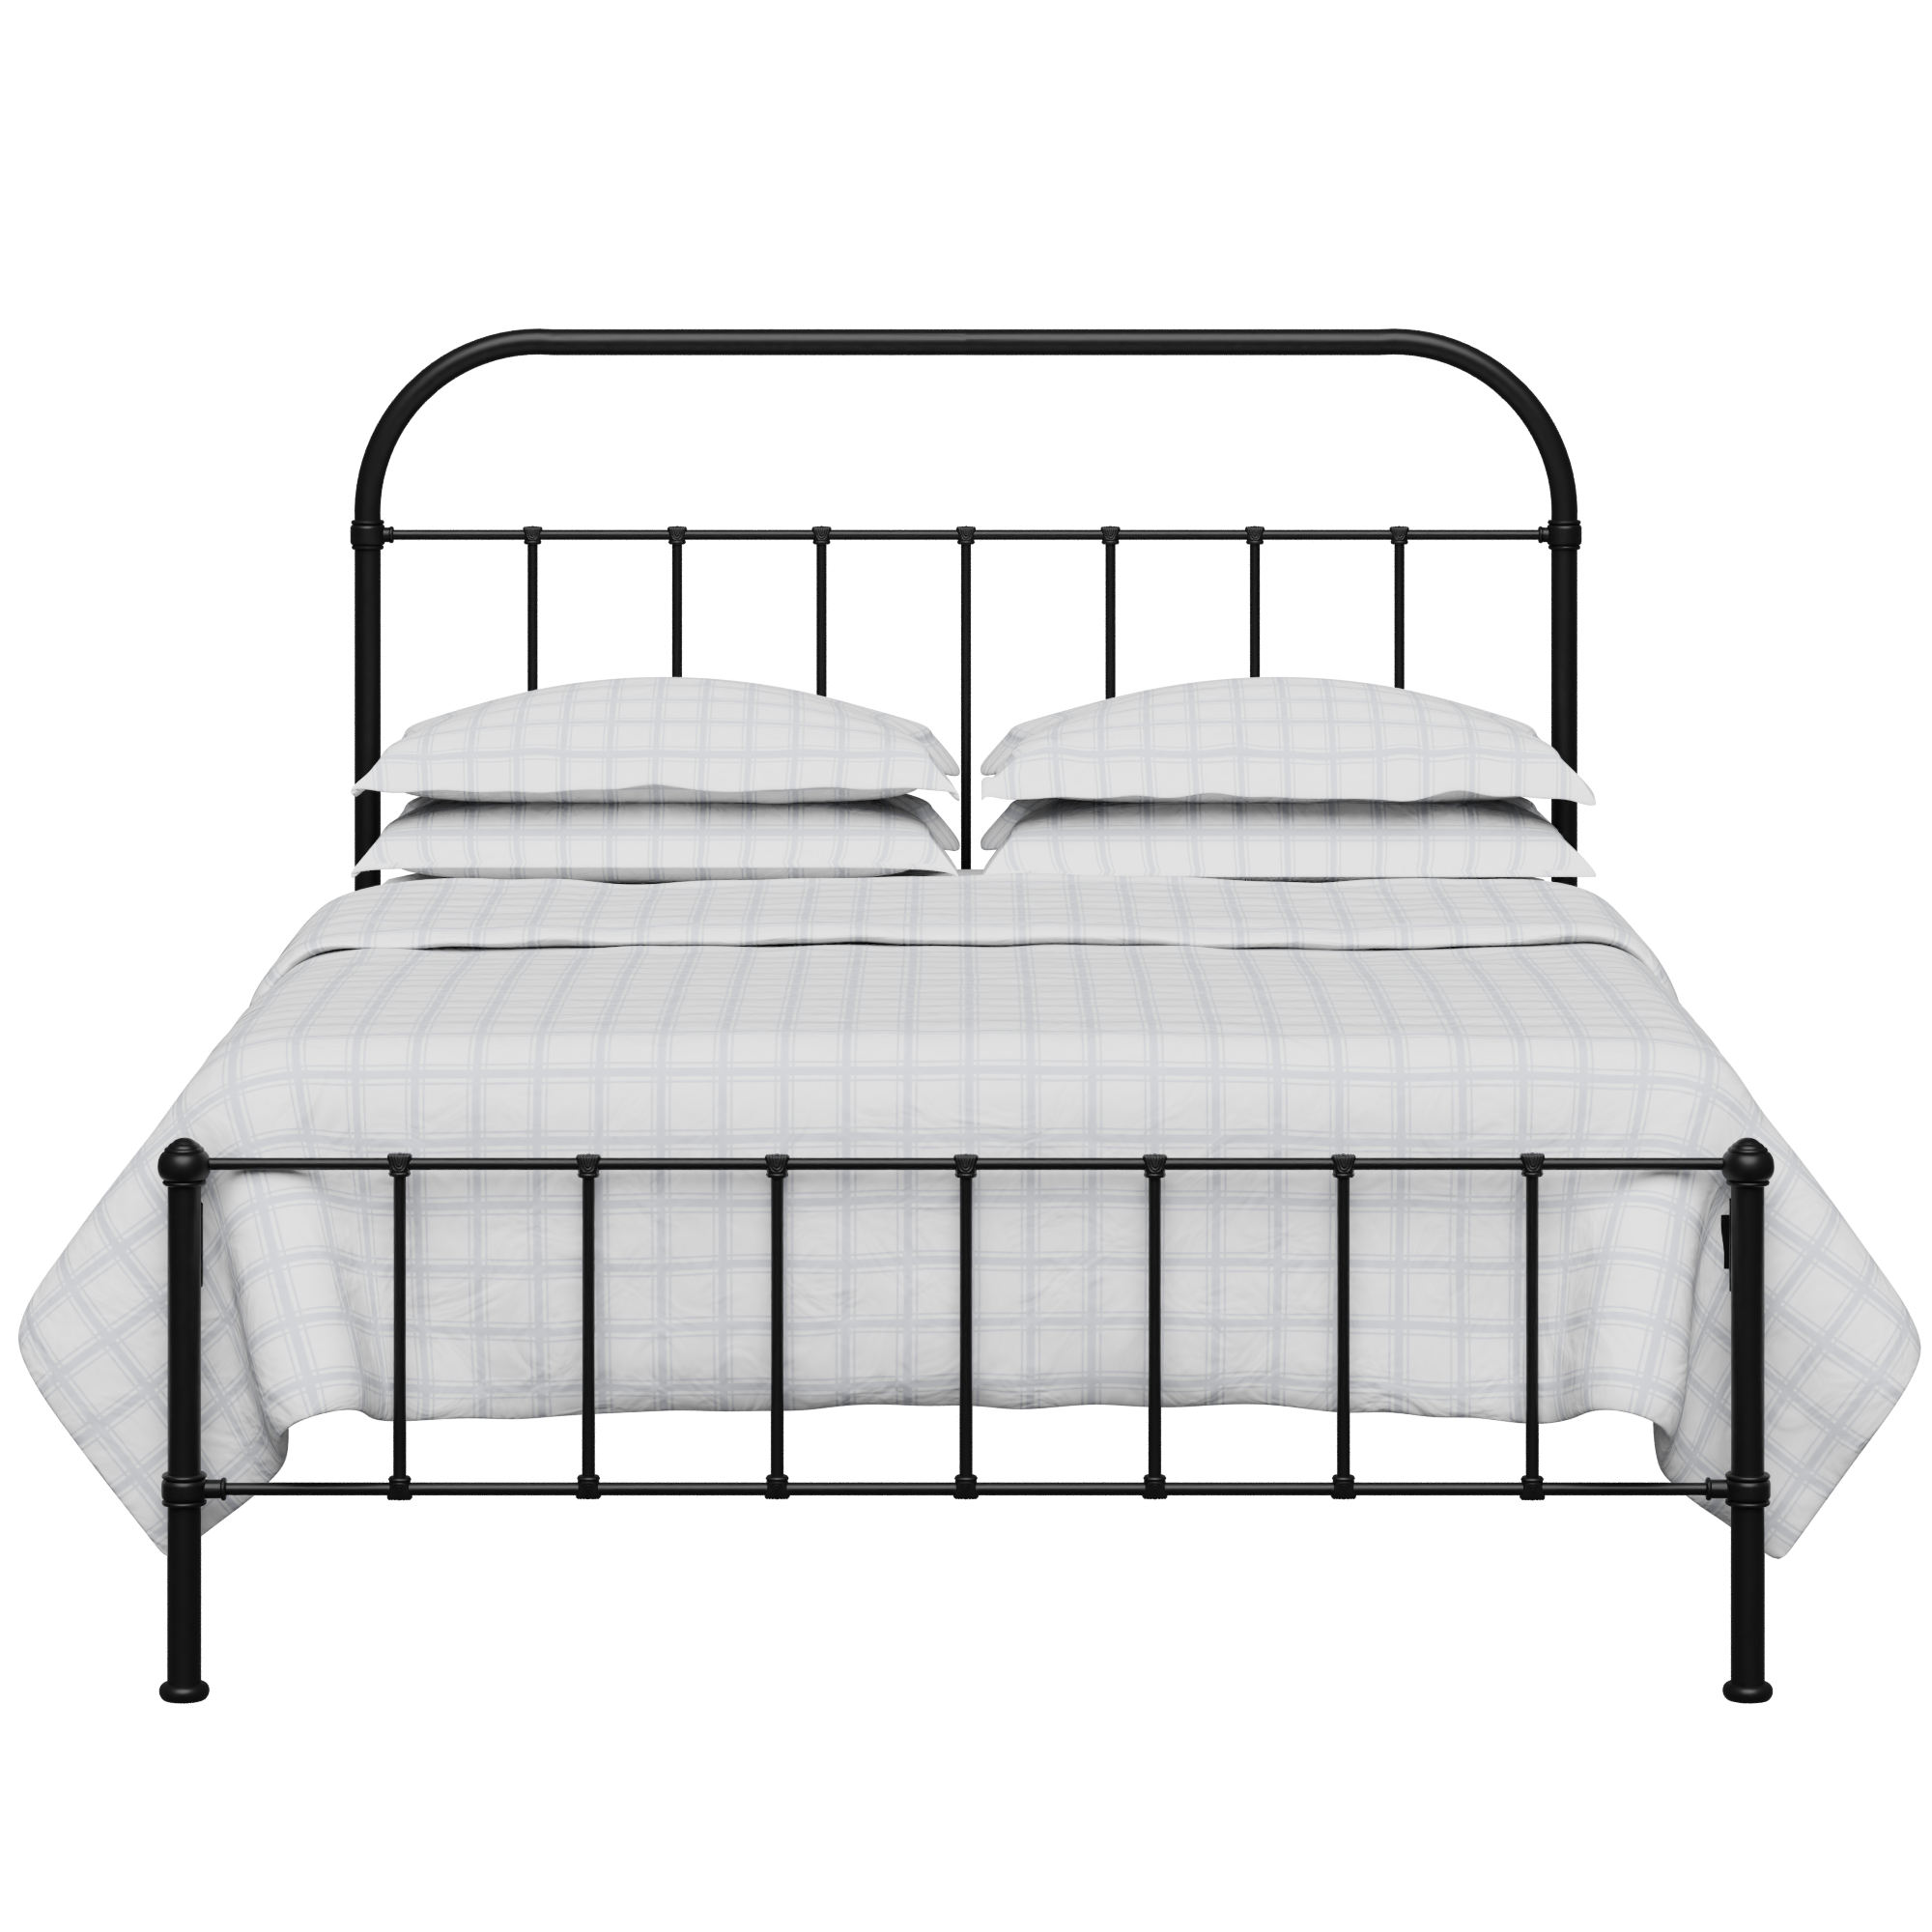 Solomon Iron Metal Bed Frame The, What Kind Of Metal Are Bed Frames Made Of